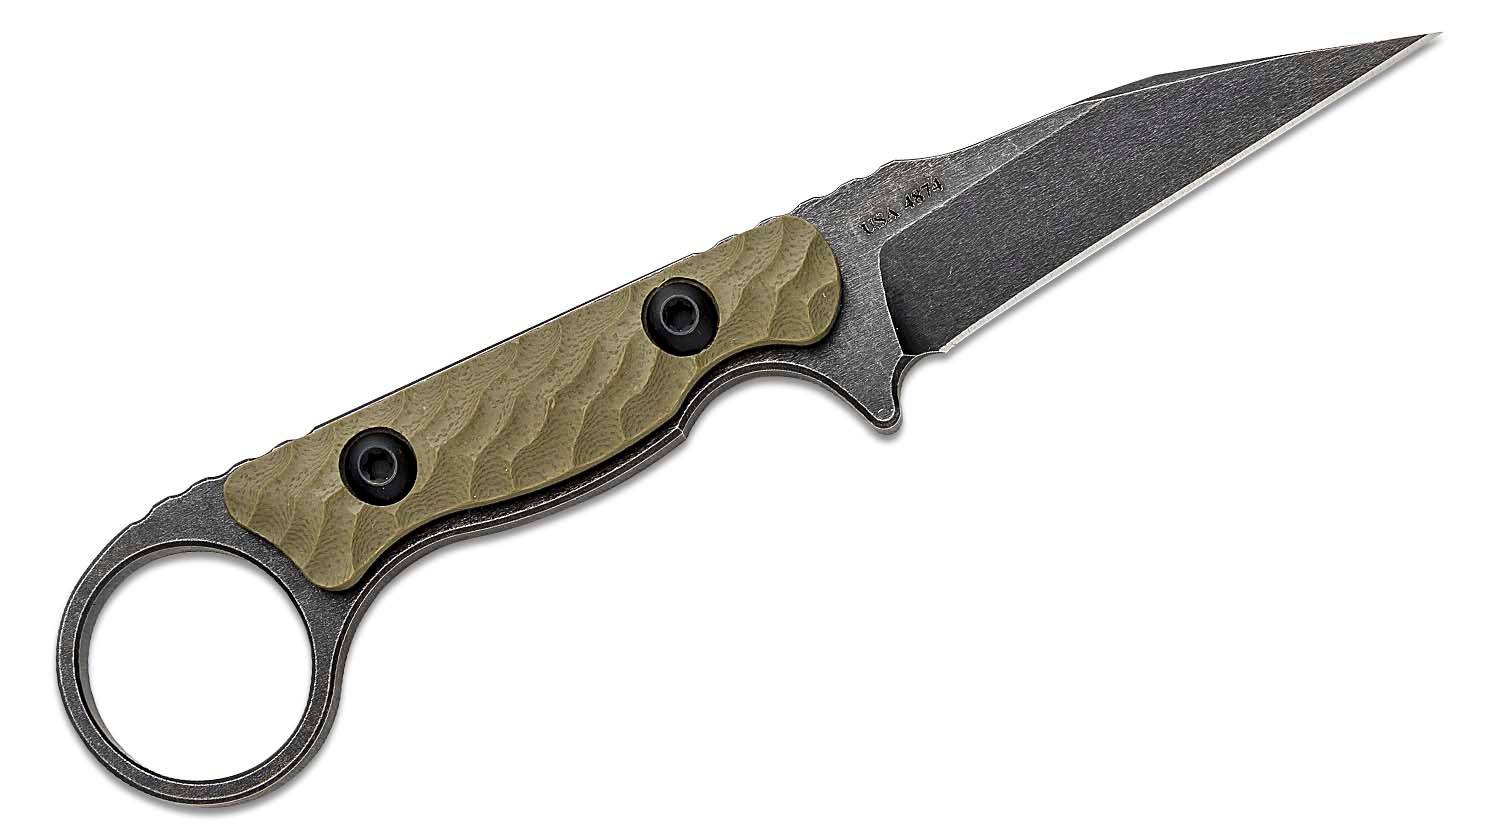 Toor Knives G10 Jank Shank Fixed Blade Neck Knife 3 CPM-154 Black  Stonewashed Wharncliffe, Machined Covert Green G10 Handles with Pinky Ring,  Camo Kydex Sheath - KnifeCenter - G10 Jank Shank Covert Green